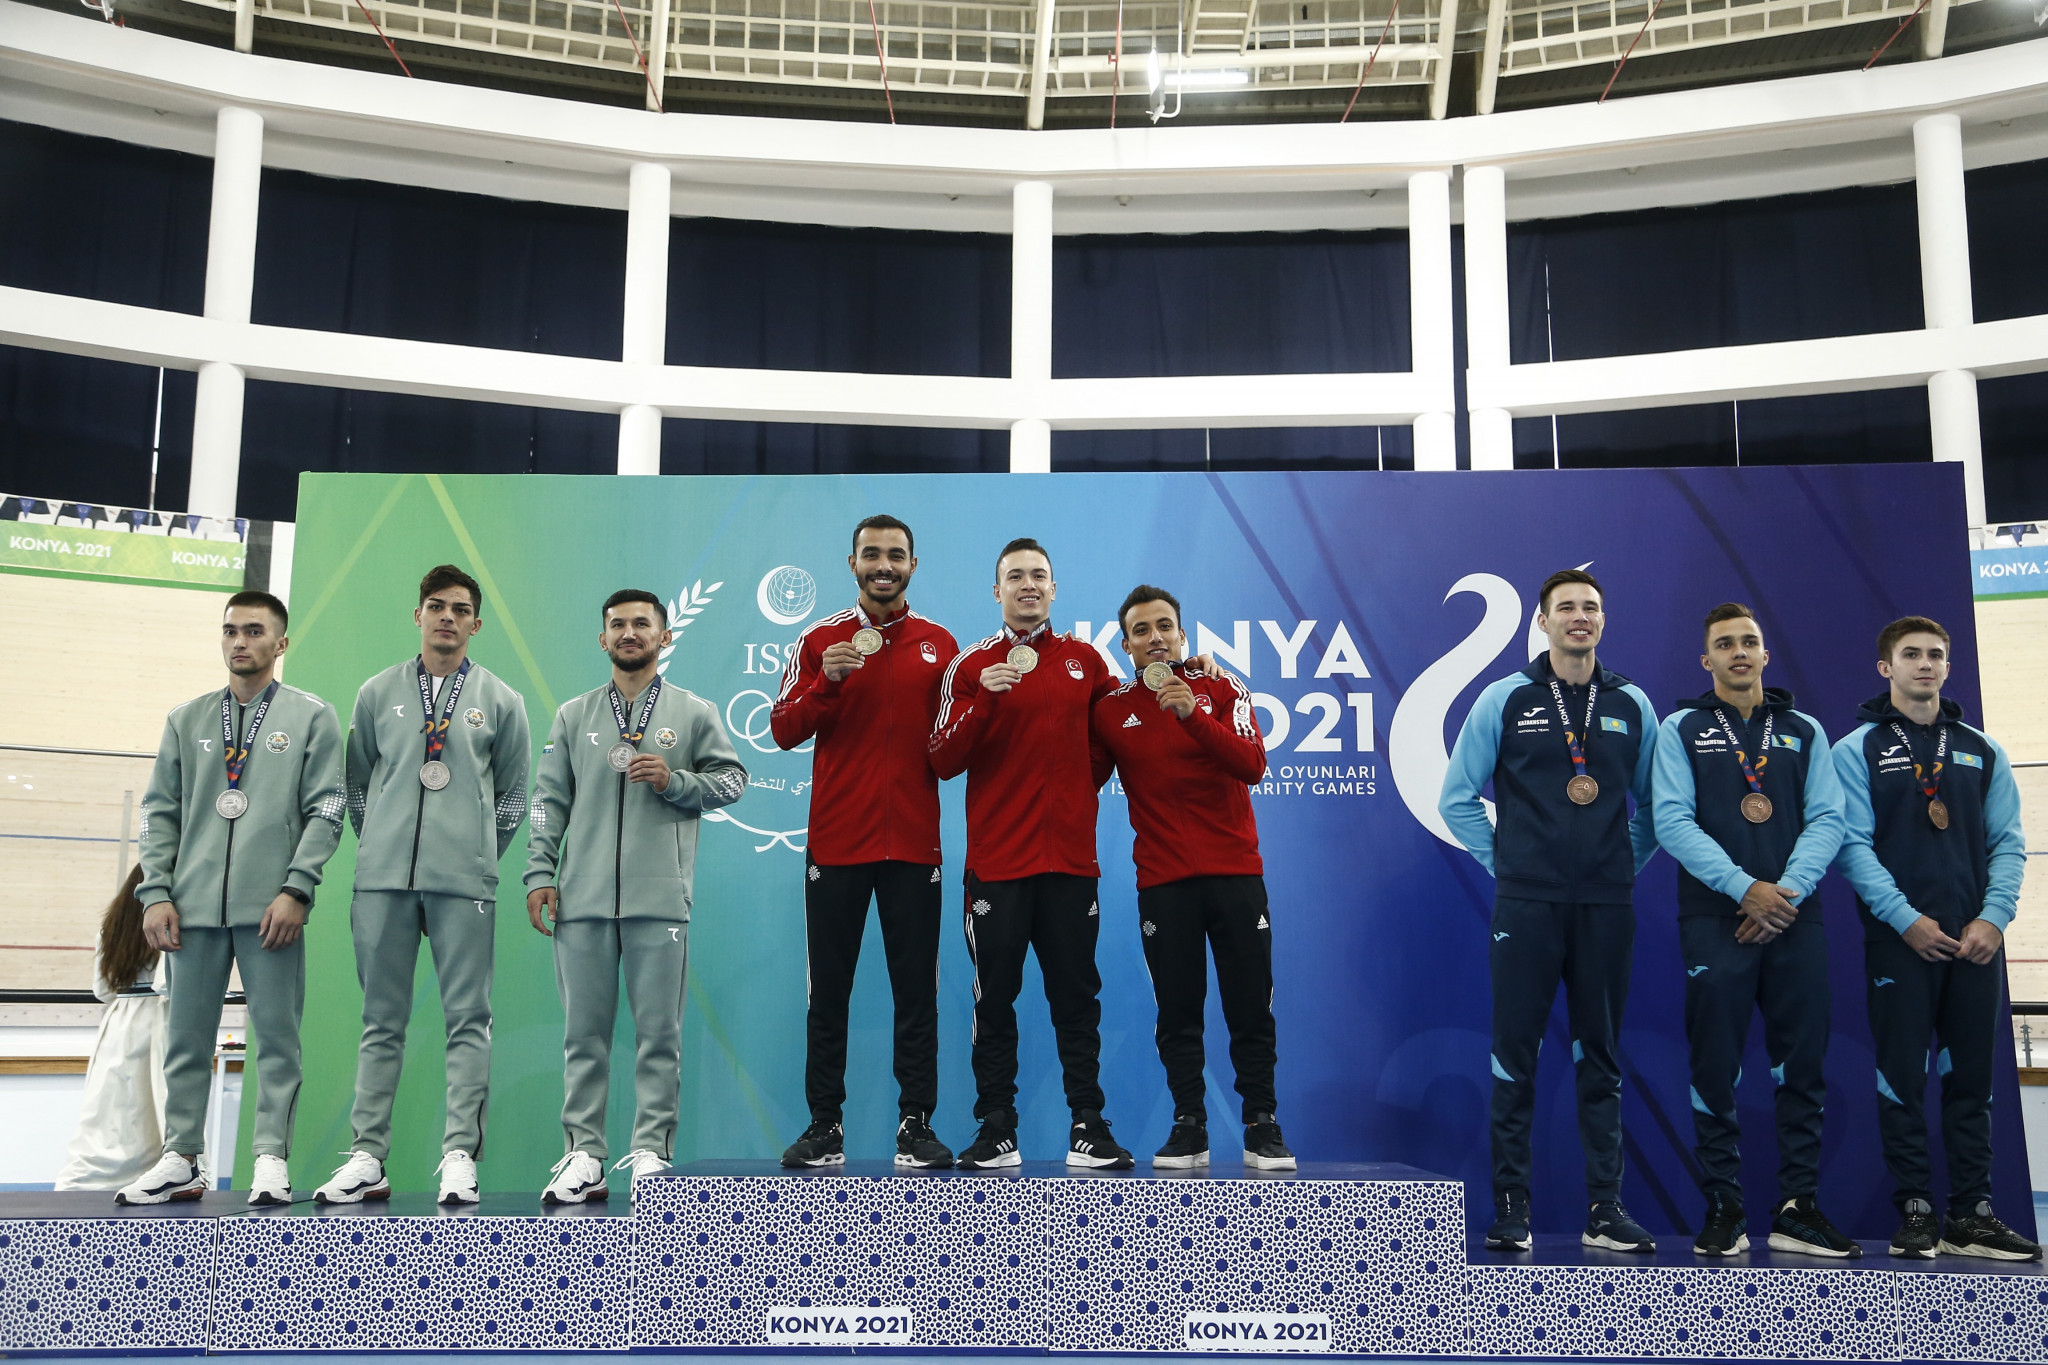 Asil wins two golds as Turkey retain gymnastics team title at Islamic Solidarity Games